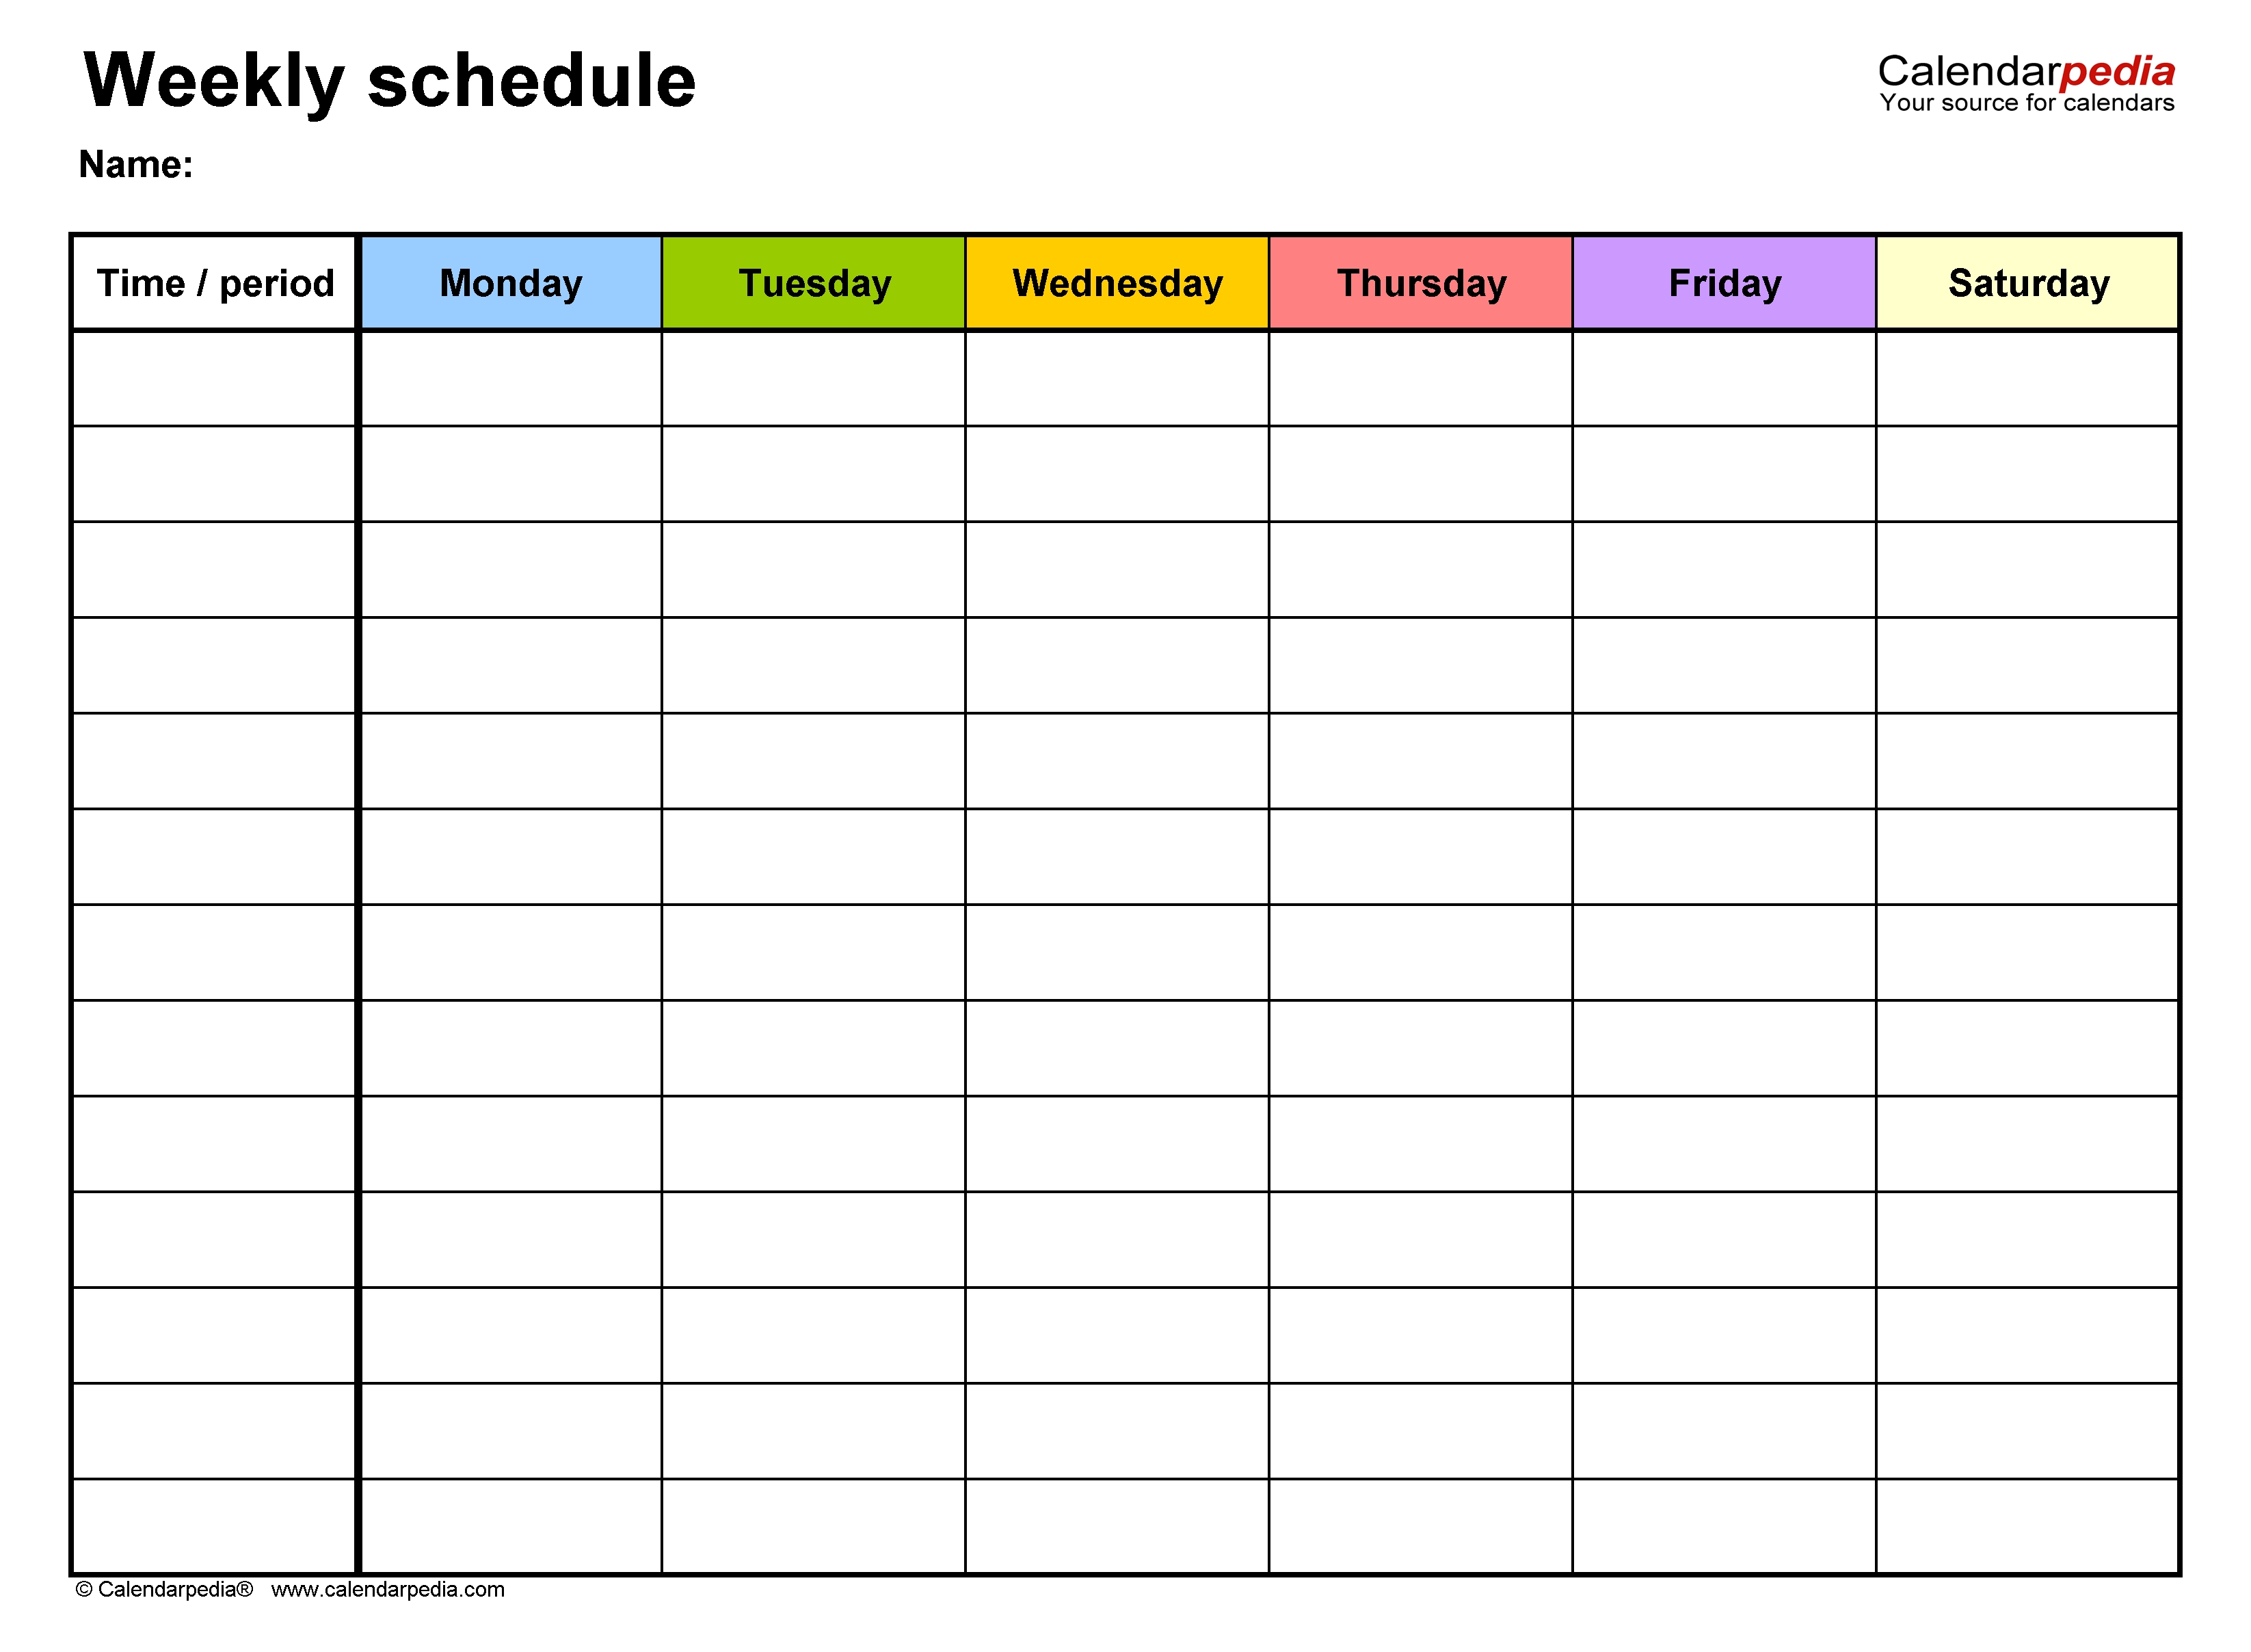 Free Weekly Schedules For Excel - 18 Templates Free 8 Week Calendar Template